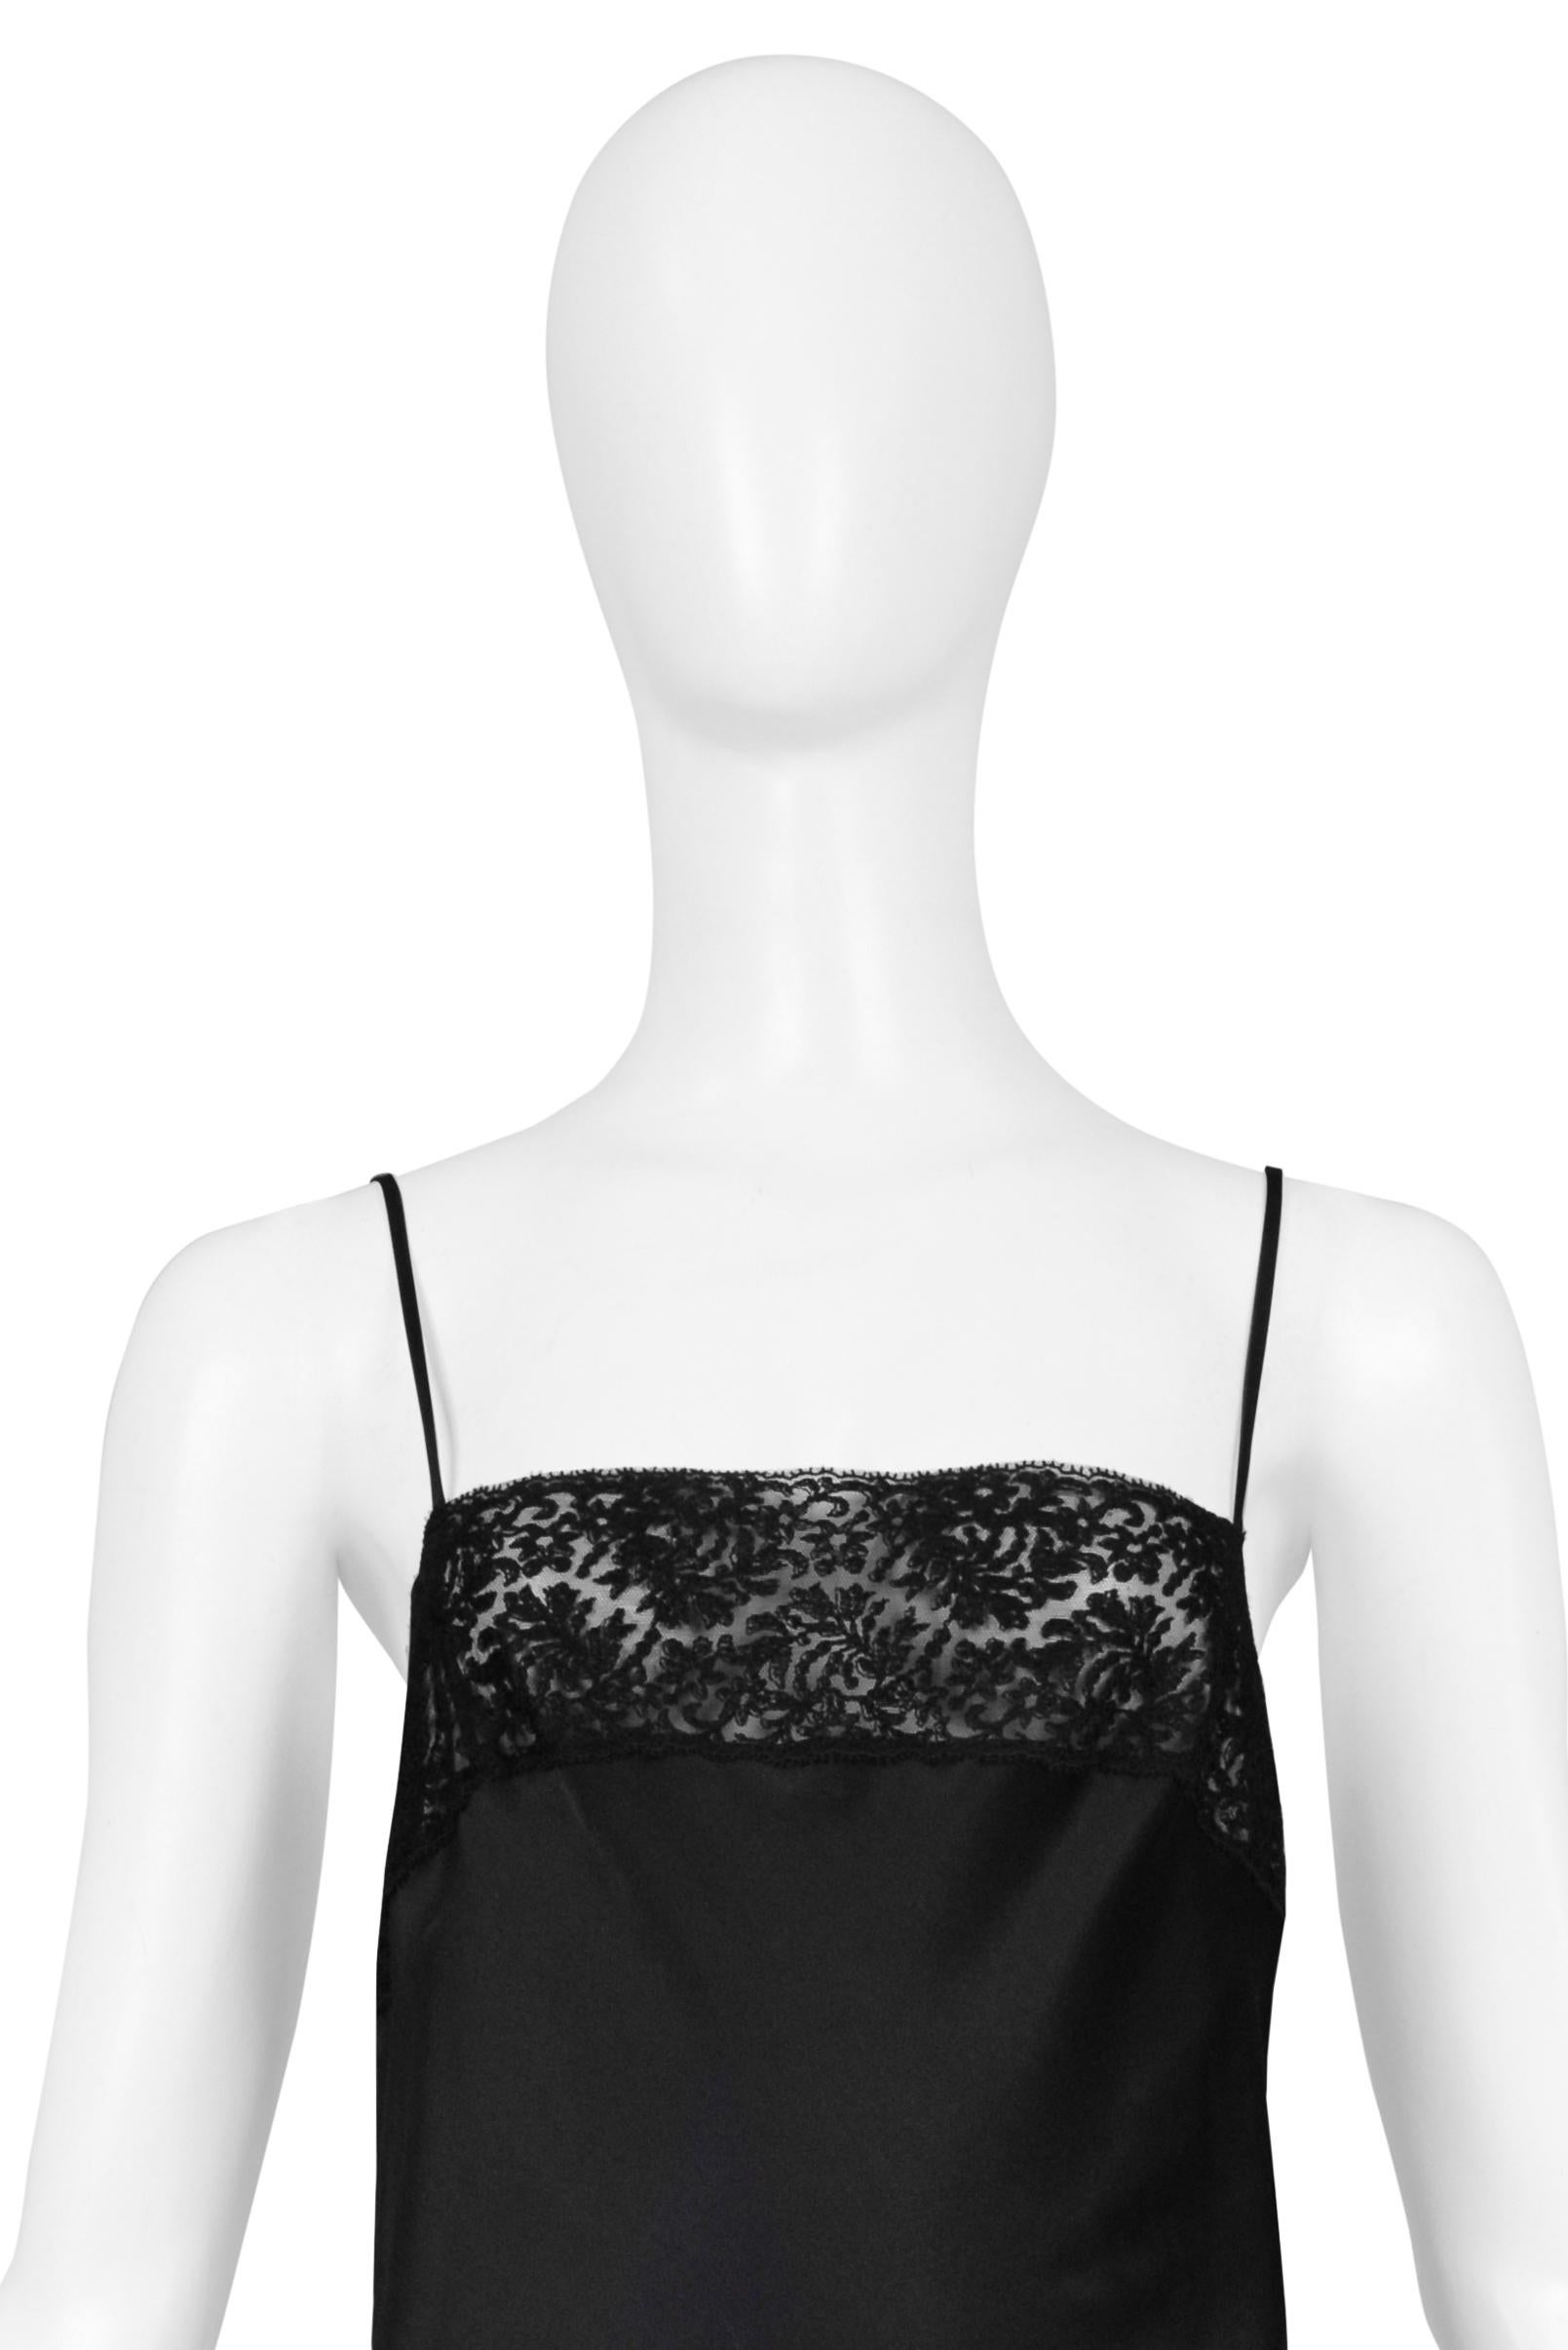 Women's Christian Dior By John Galliano Black Silk And Lace Slip Dress 1997 For Sale